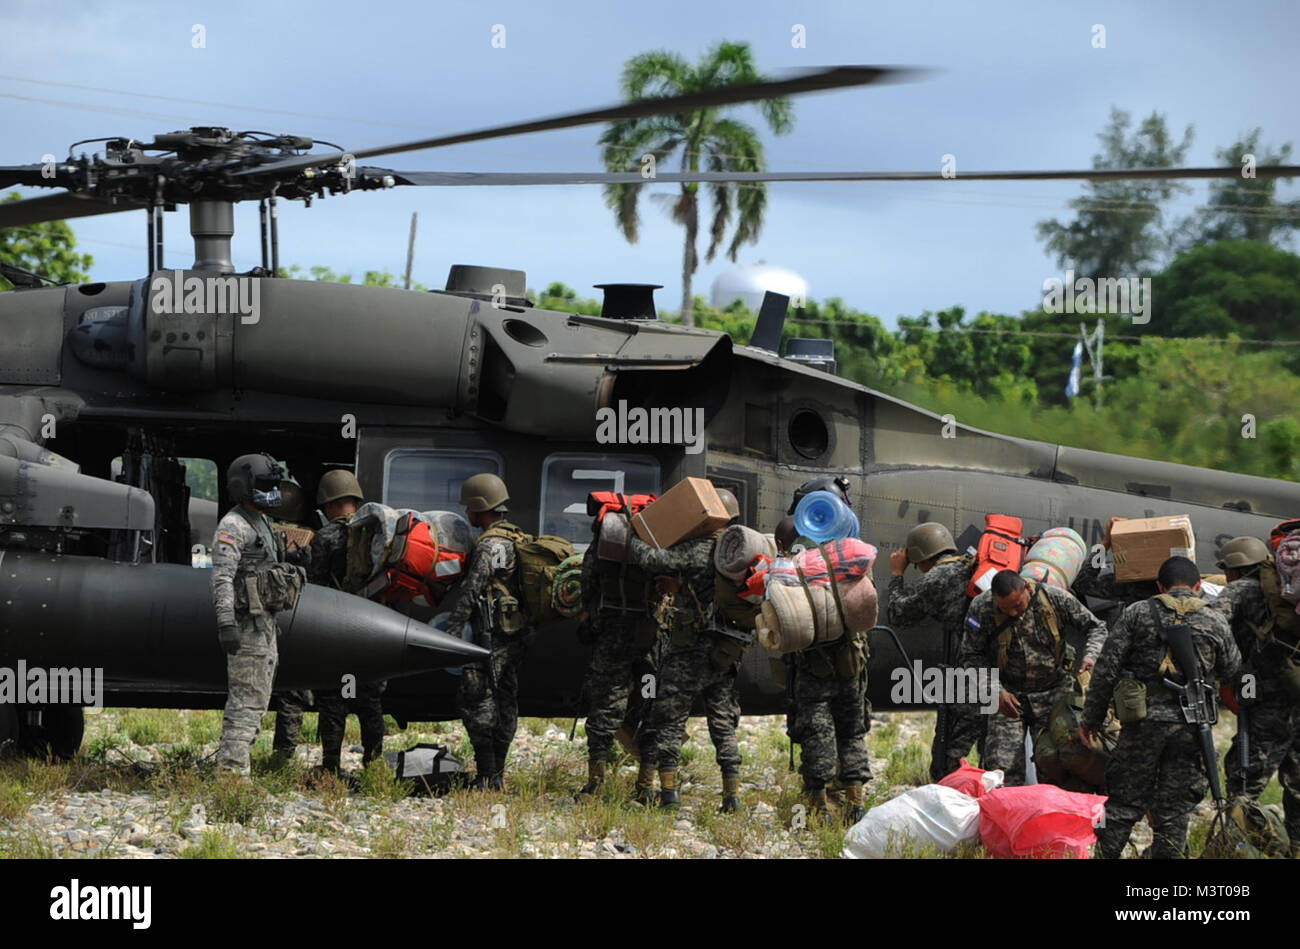 A U.S. Army UH-60 Black Hawk provides support to Honduras during Operation CARAVANA XIII, Nov. 4, 2015, in the Gracias a Dios department (state) of Honduras. The U.S. has provided airlift support at the request of the Honduran government since October 2014, enabling the Honduran military greater freedom of operation to counter drug trafficking and related criminal activities. (U.S. Air Force photo by Capt. Christopher J. Mesnard/Released) 151104-F-DT859-104 by ussouthcom Stock Photo